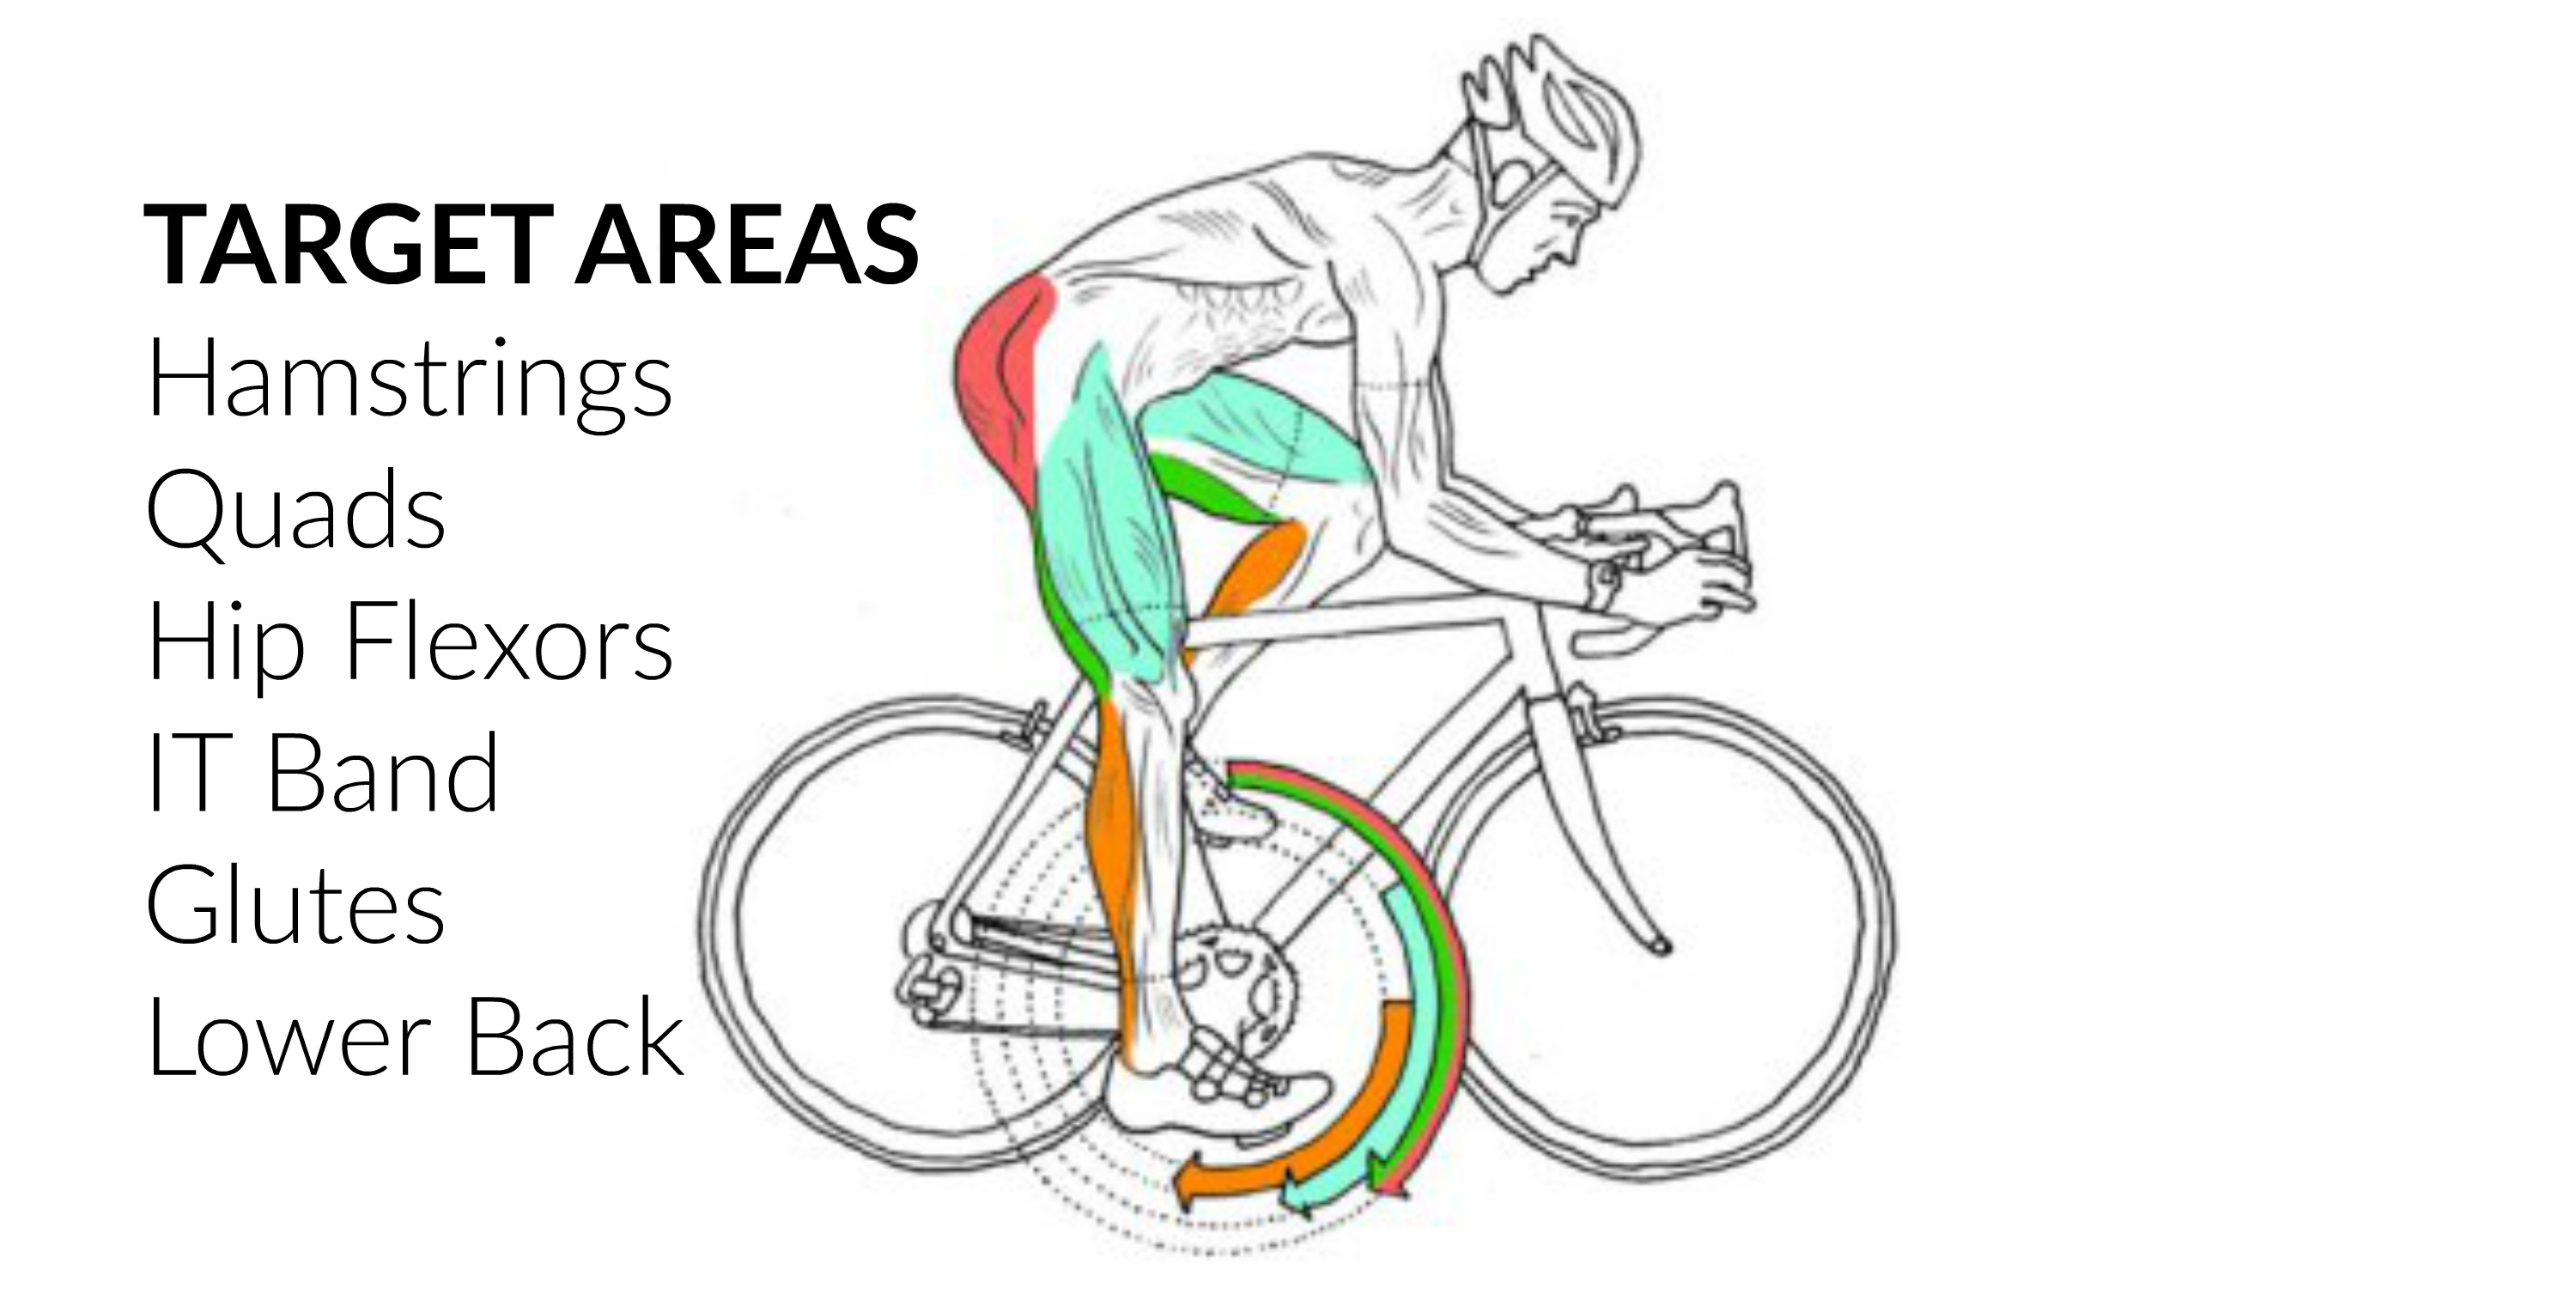 10 Best Stretches for Cyclists  Daily Routines by Dynamic Cyclist